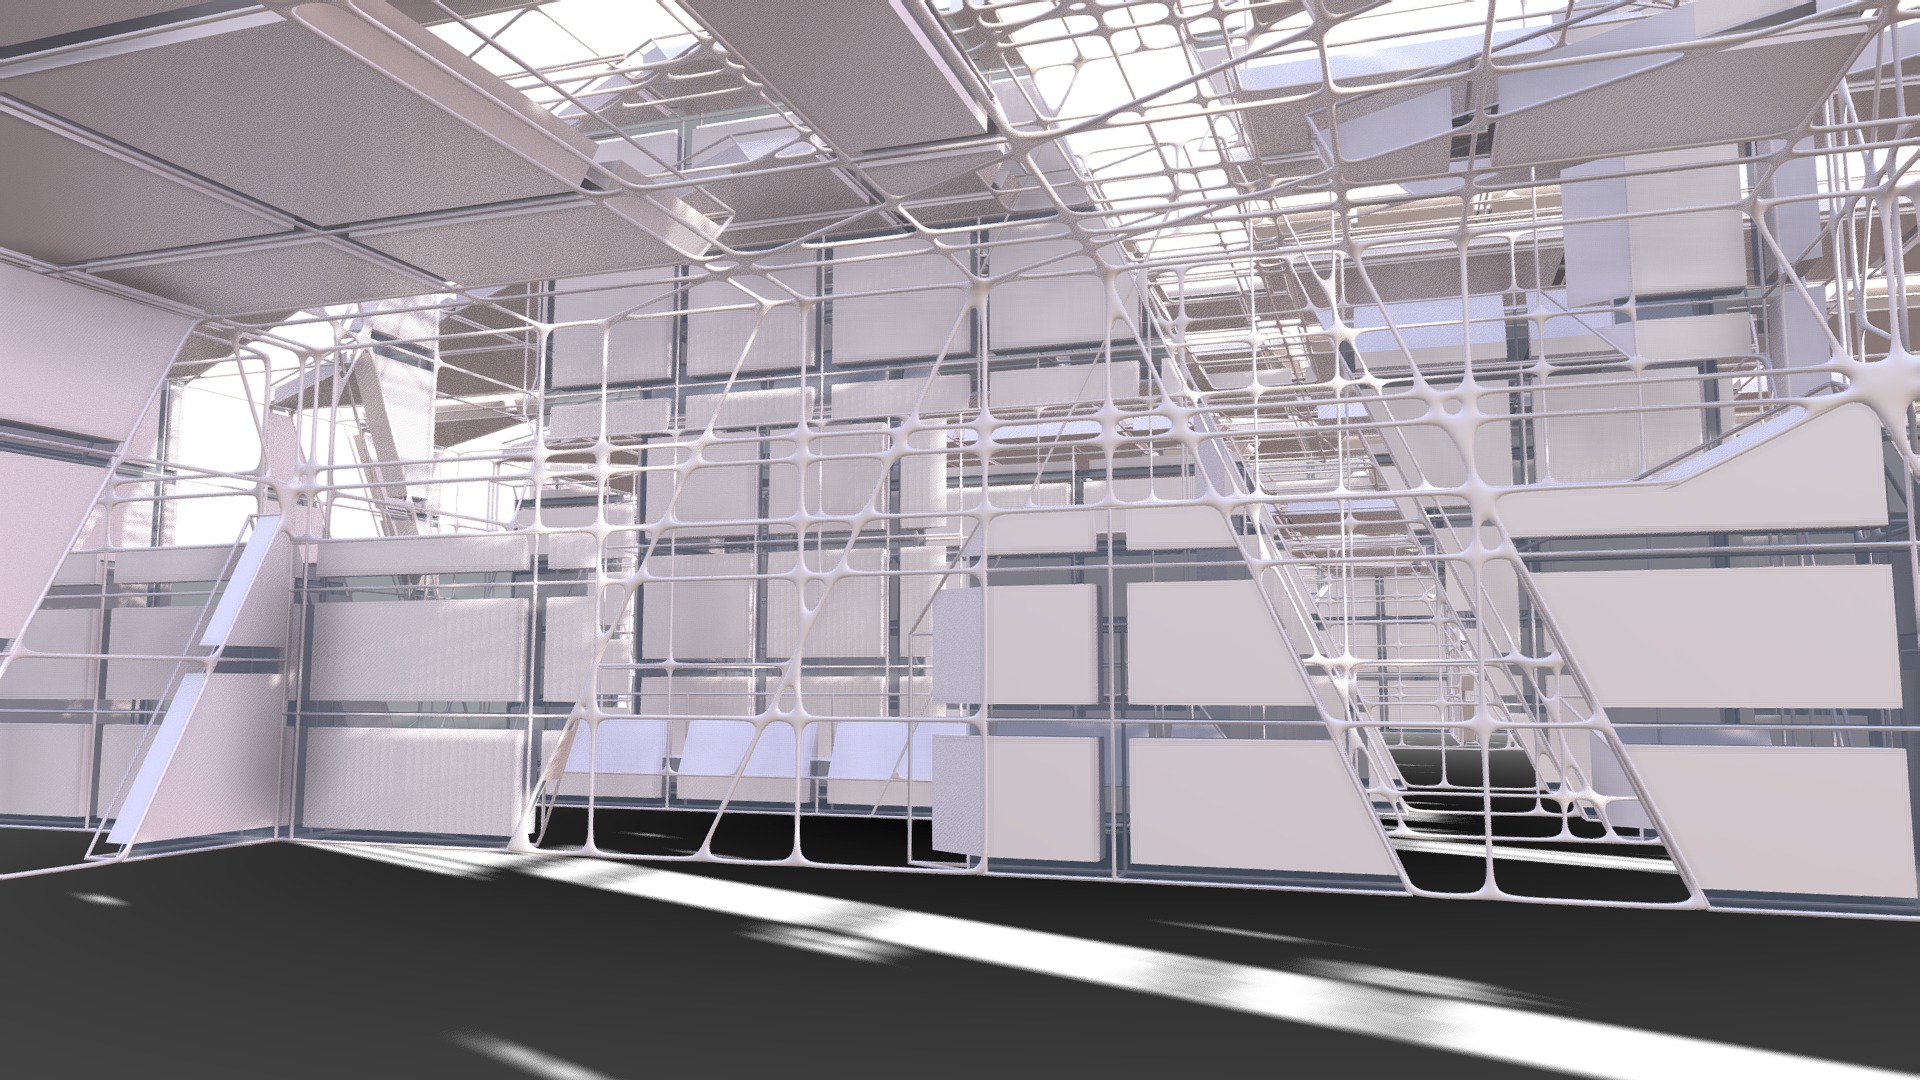 3D model Futuristic Architectural Interior 16 - This is a 3D model of the Futuristic Architectural Interior 16. The 3D model is about a large white building with glass walls.